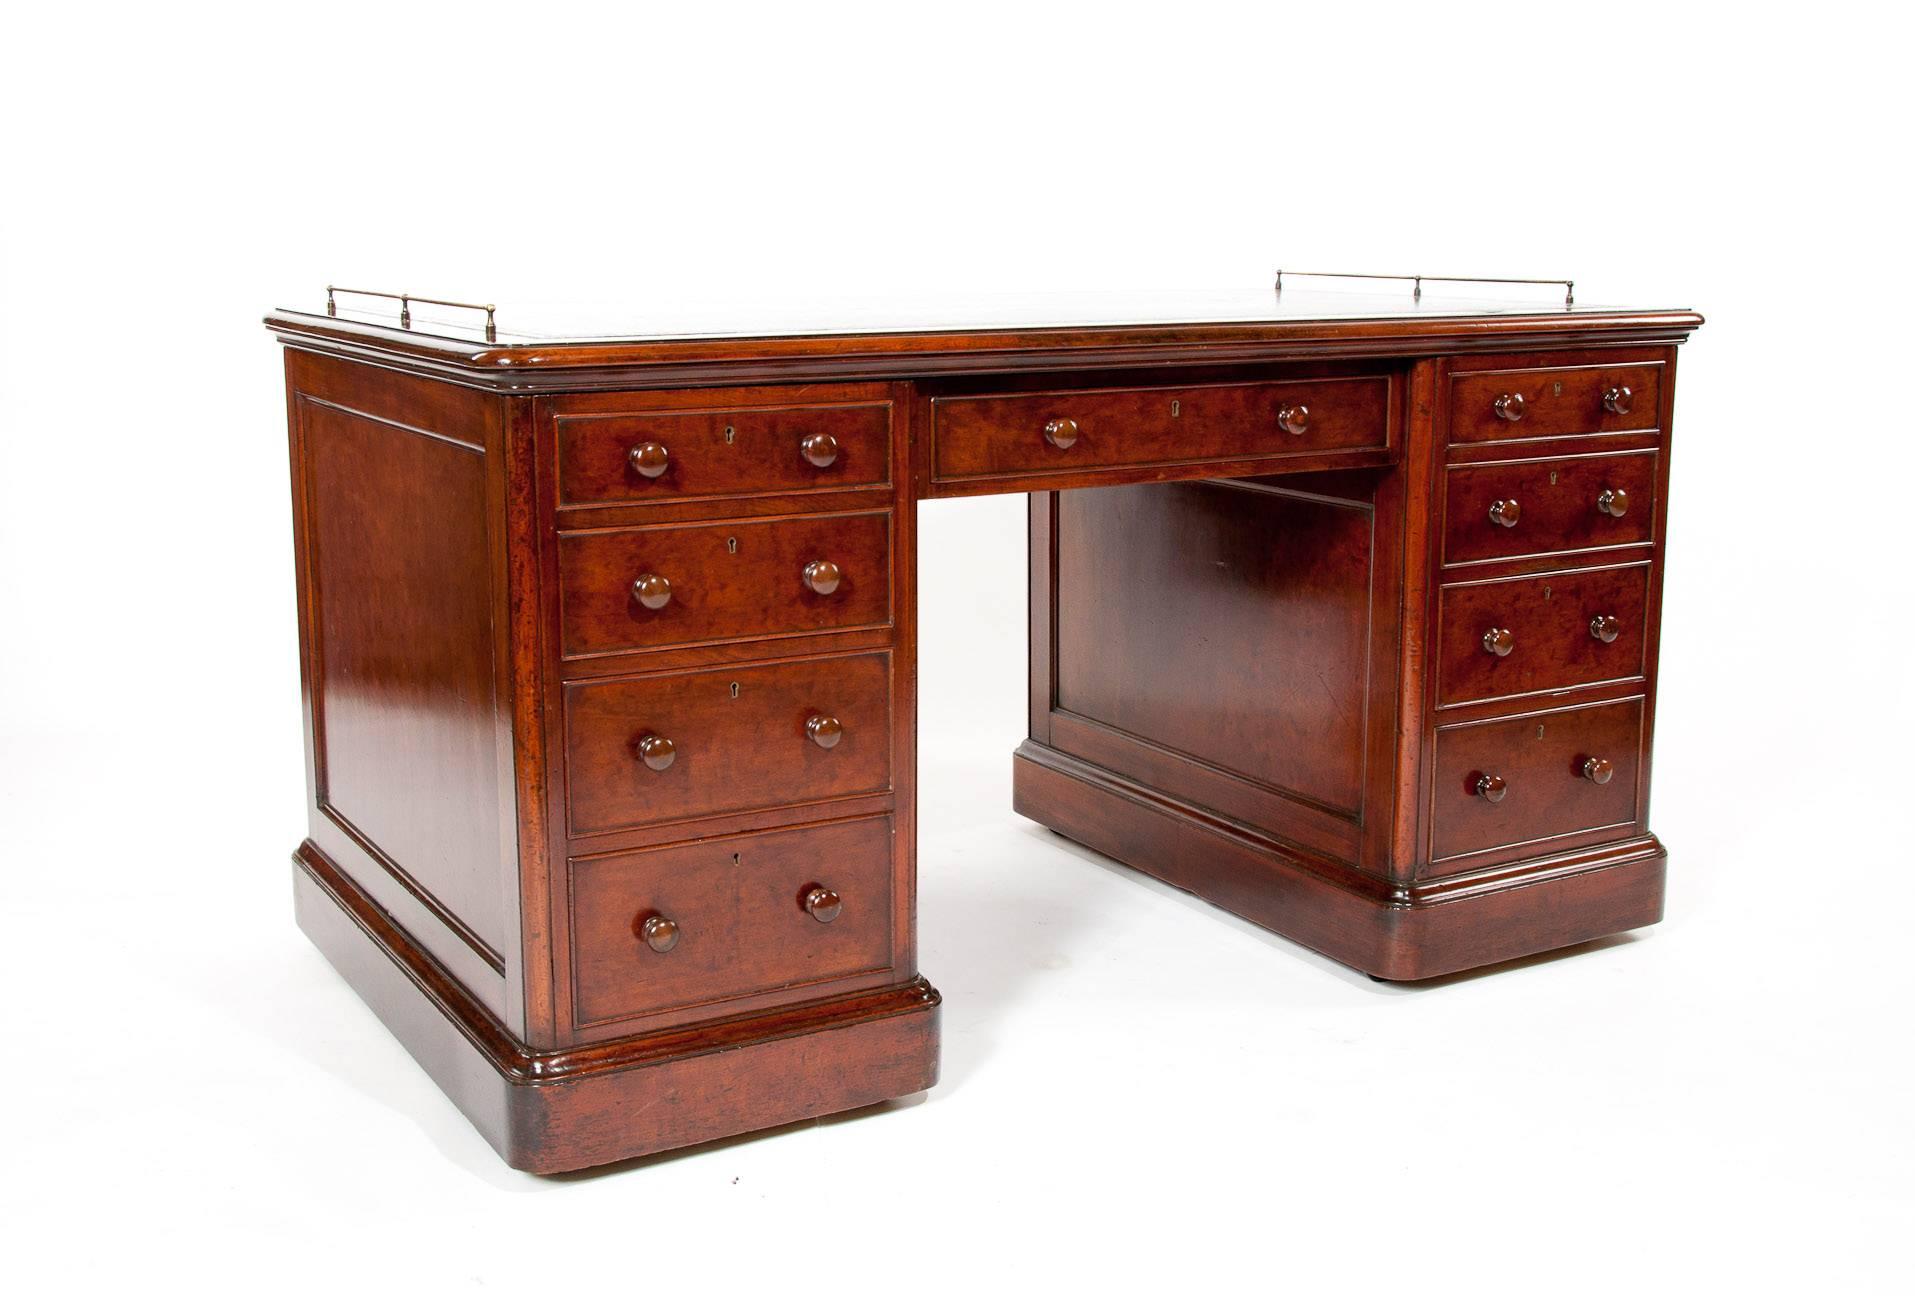 The important historical desk of Admiral Sir Albert Hastings Markham (Admiral Markham) born 11 November 1841 – 28 October 1918 was a famous British explorer, author and officer in the Royal Navy.

This Victorian 'plum pudding' mahogany partners